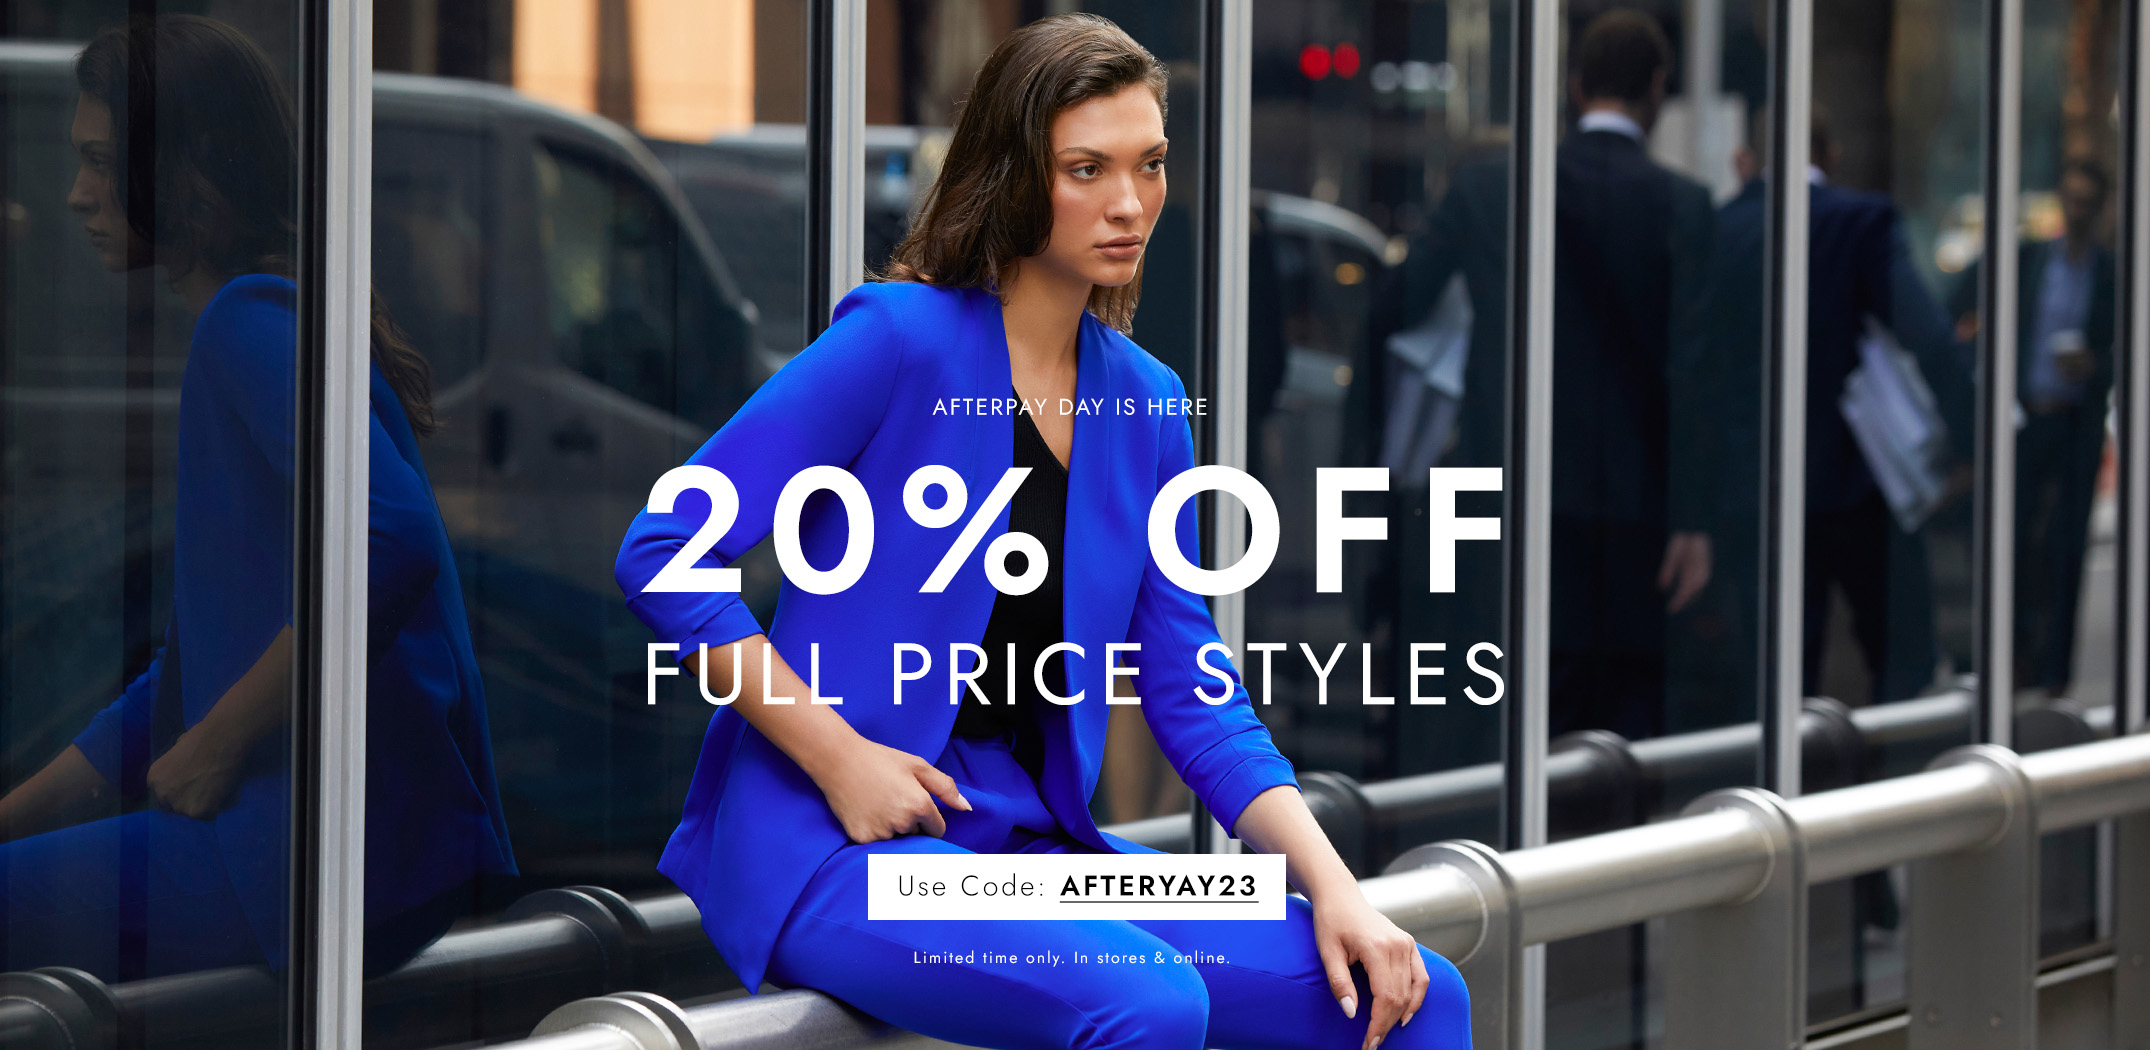 Forcast Afterpay Day - Extra 20% OFF full price styles with promo code